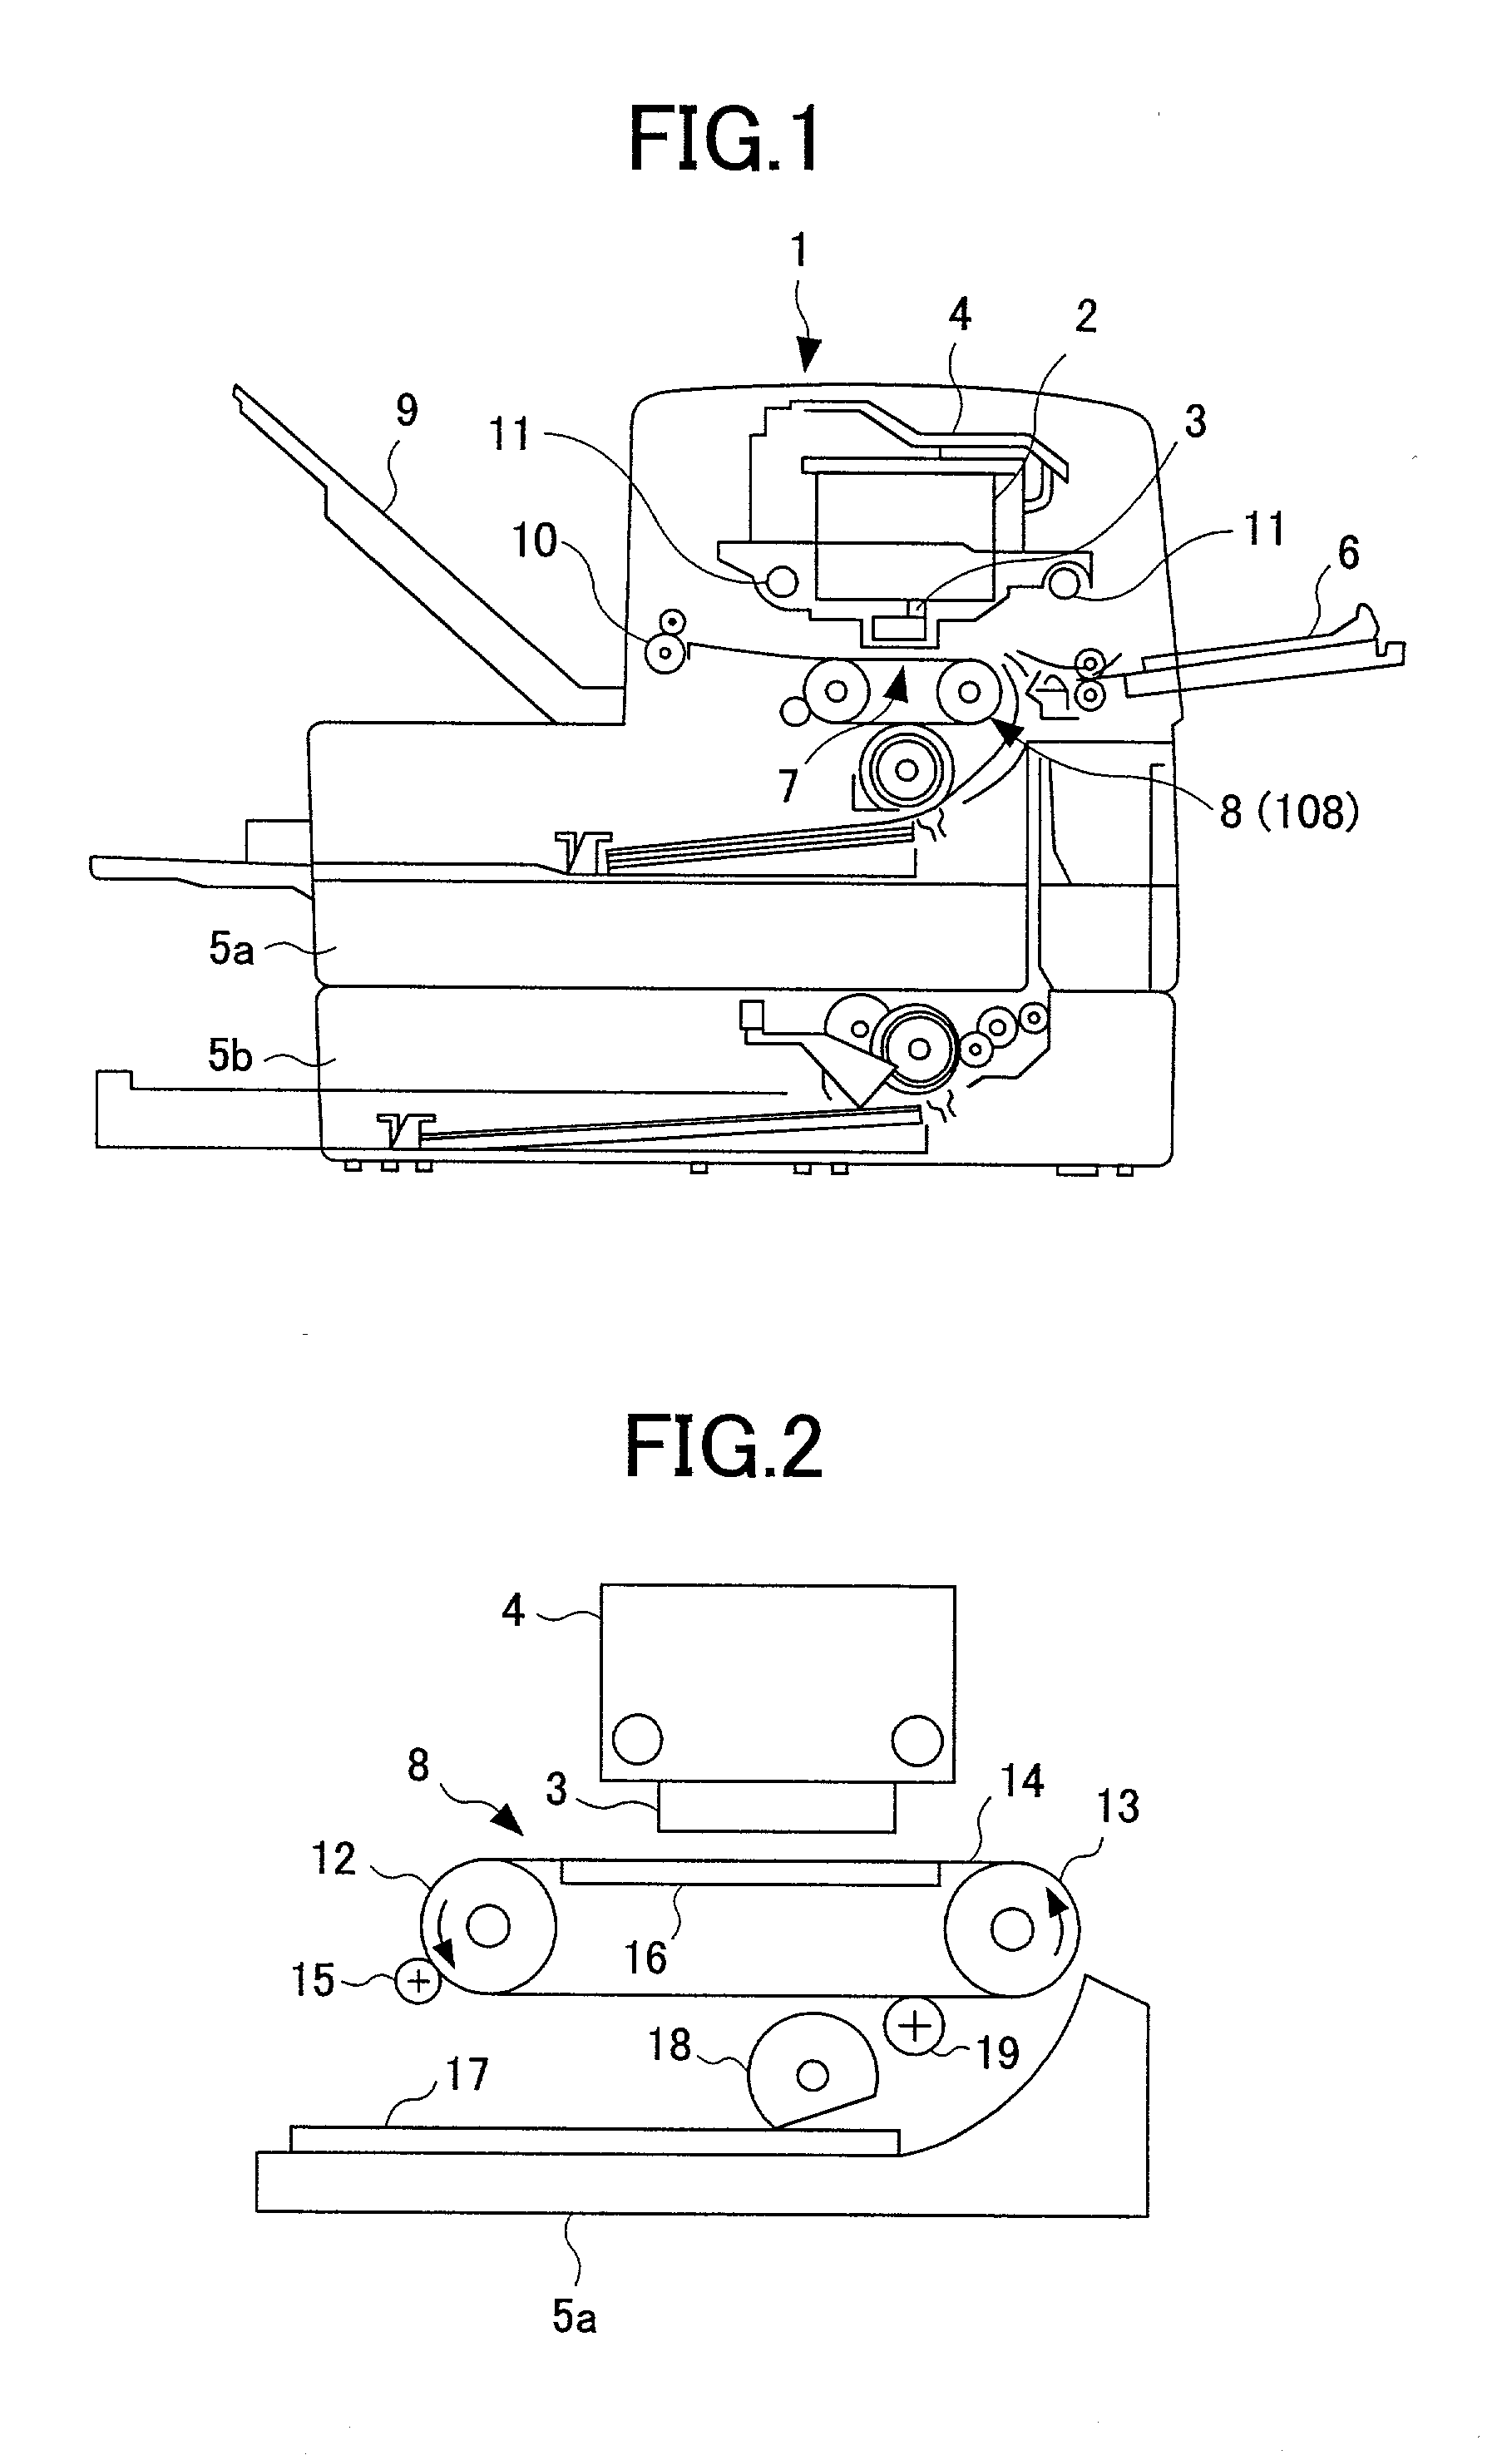 Recording-medium conveying device conveying a recording medium on a conveying belt charged with a positive charge and a negative charge alternately